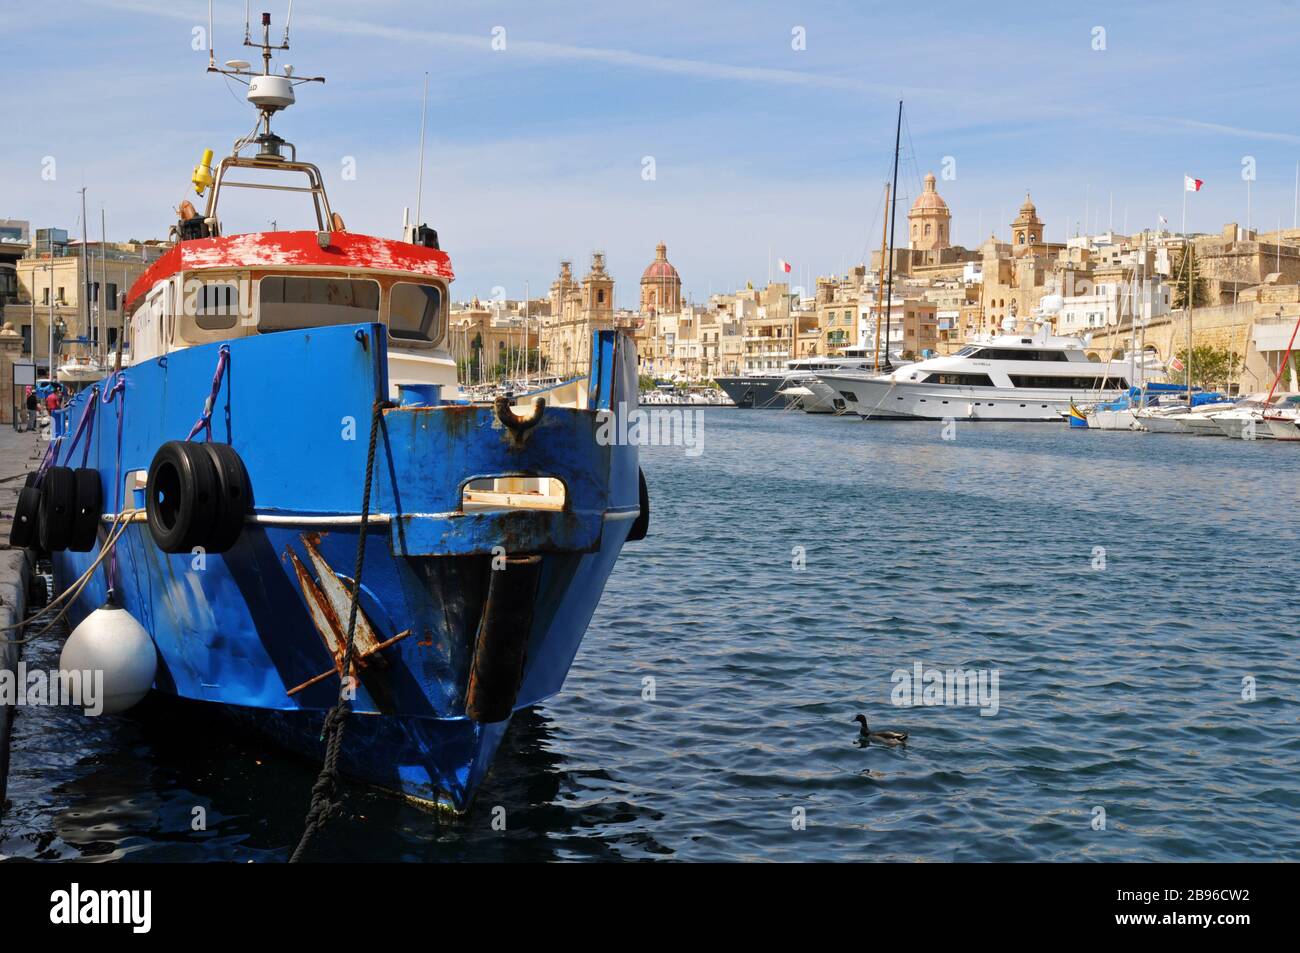 A fishing boat at the dock in Cospicua, Malta, one of the Three Cities, with luxury yachts and the city of Birgu/Vittoriosa in the background. Stock Photo